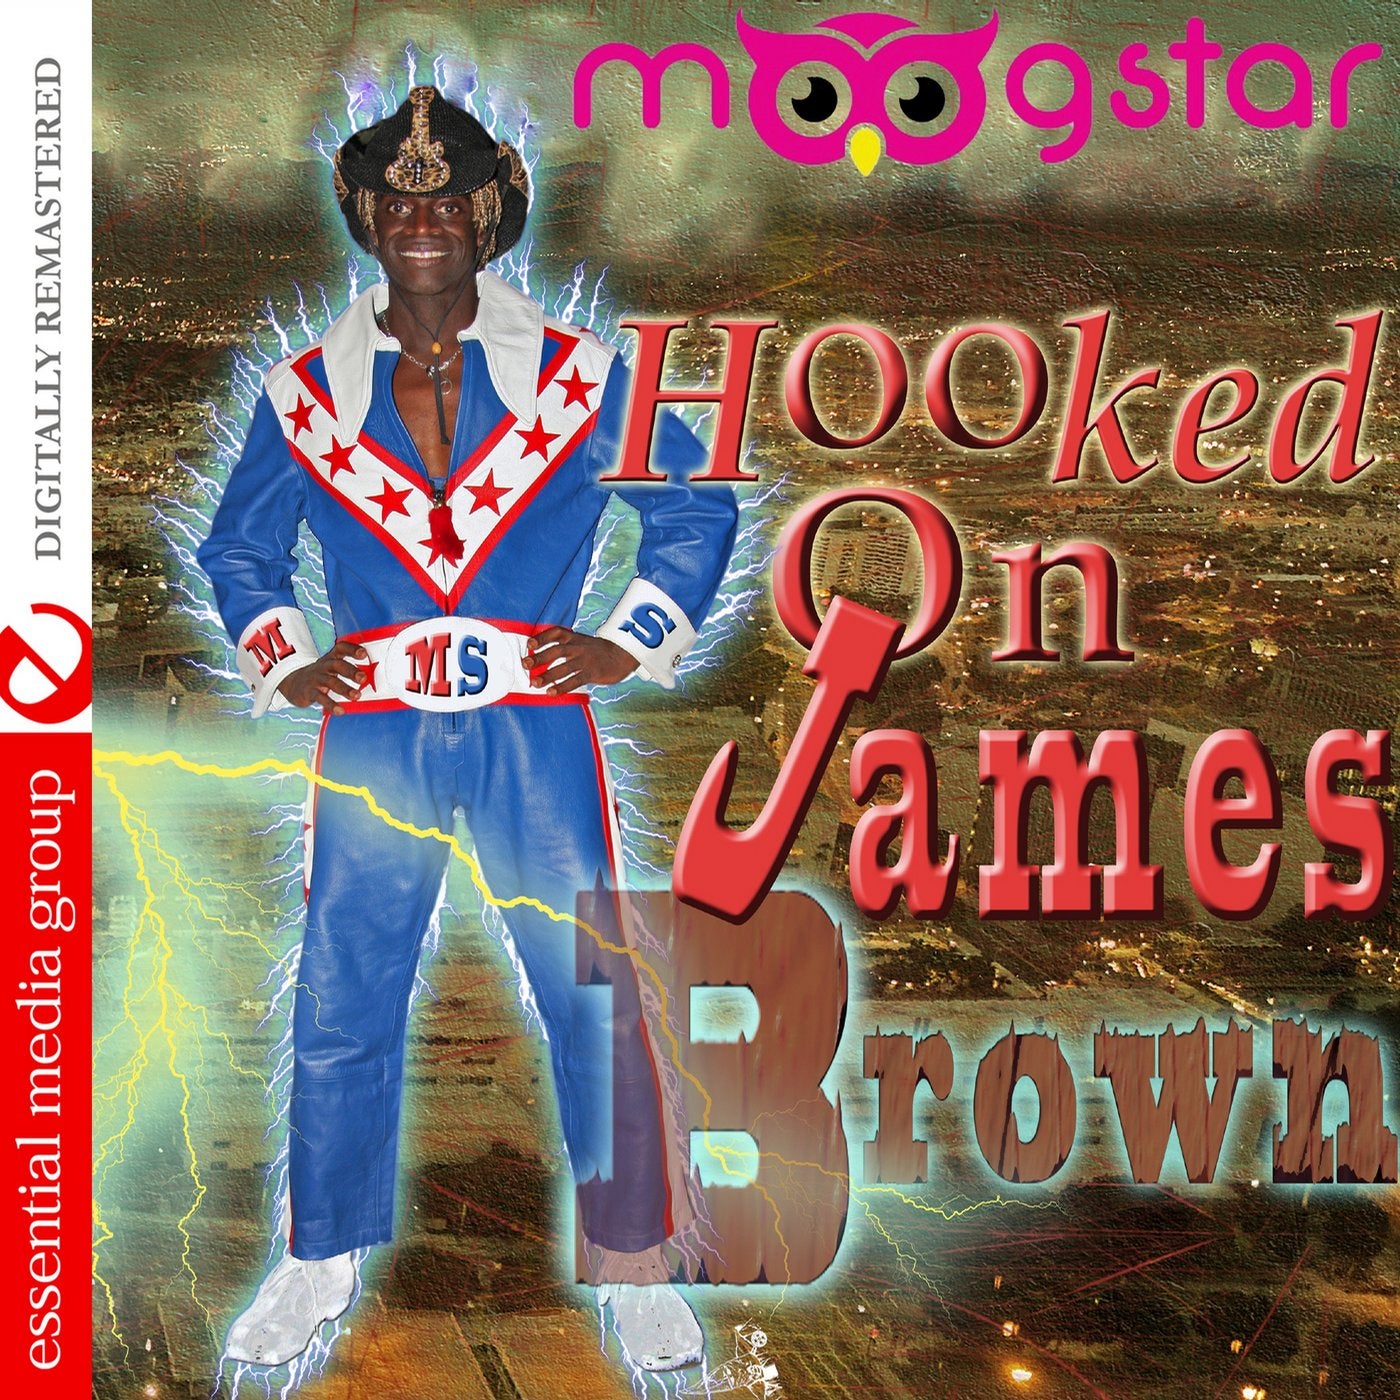 Hooked on James Brown (Digitally Remastered)